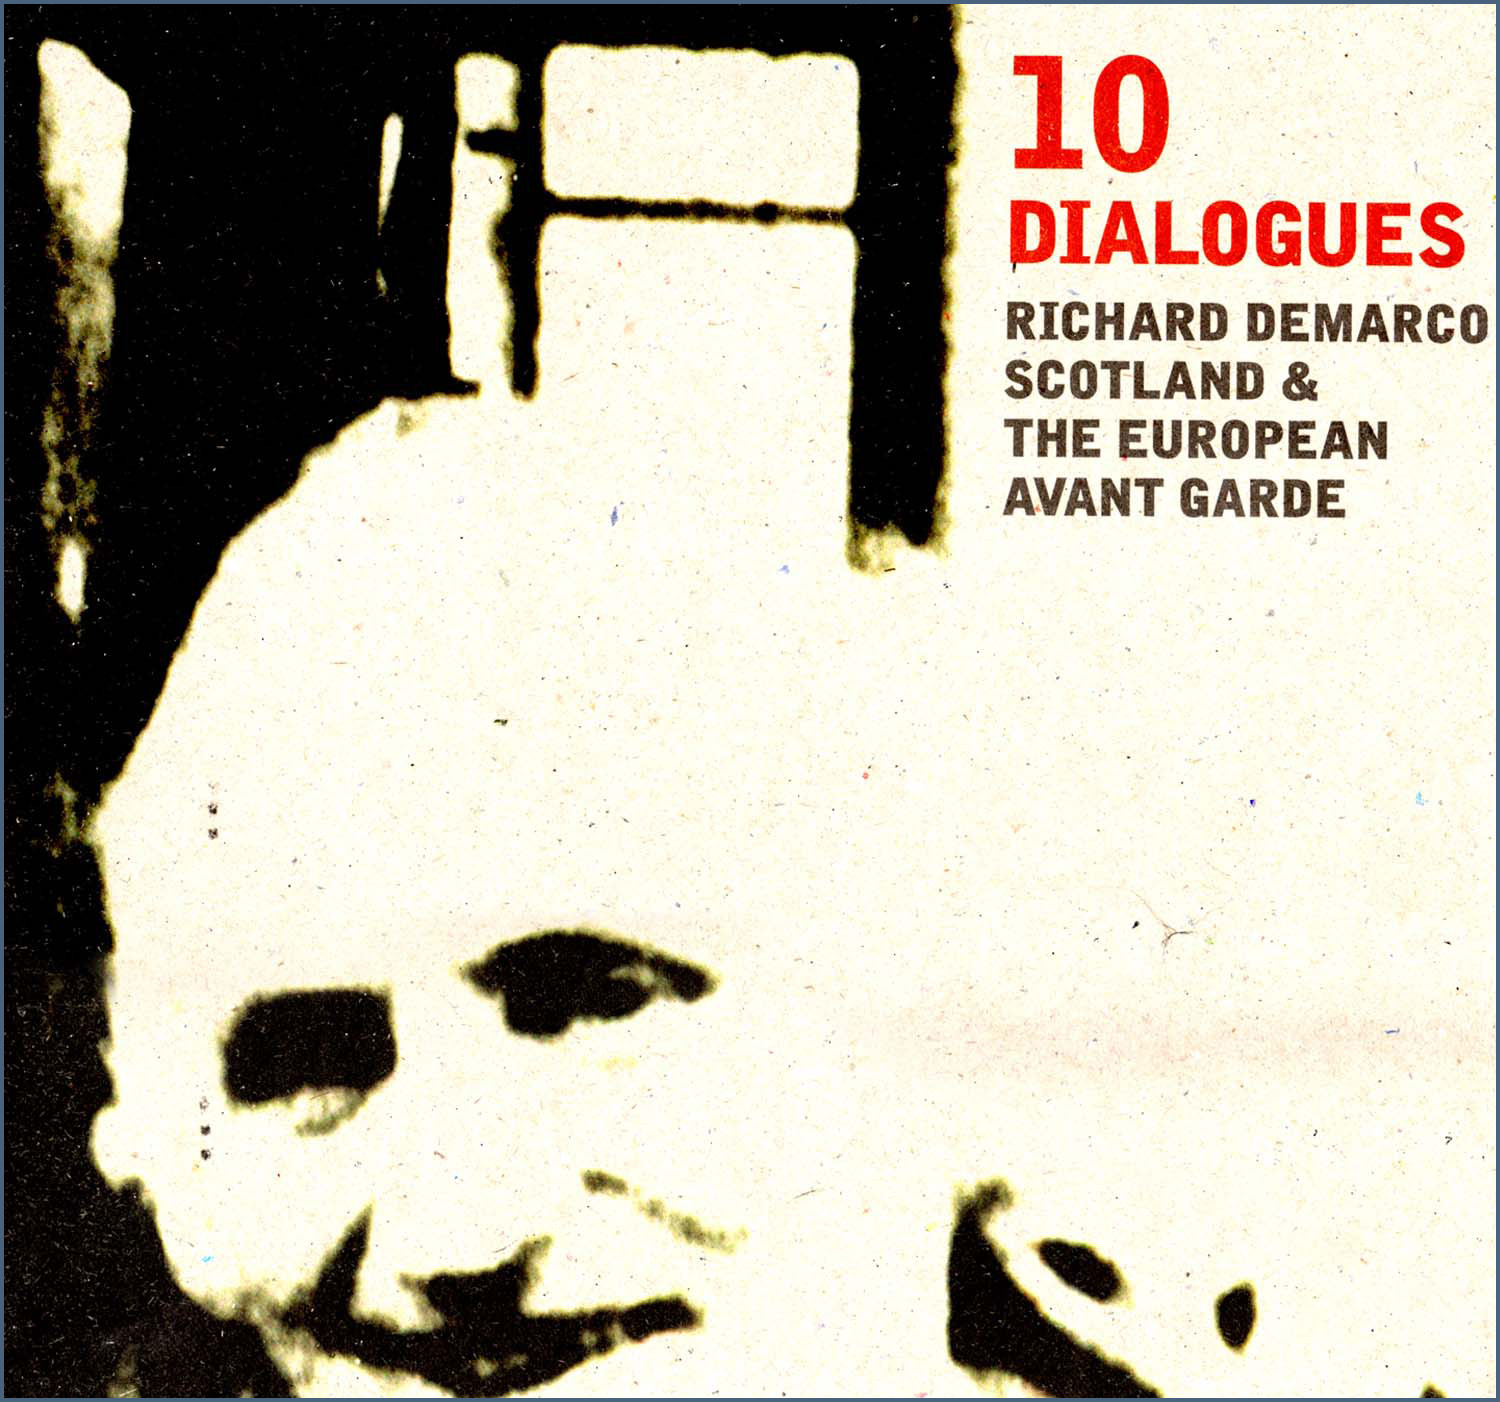 Front cover of the 10 Dialogues publication